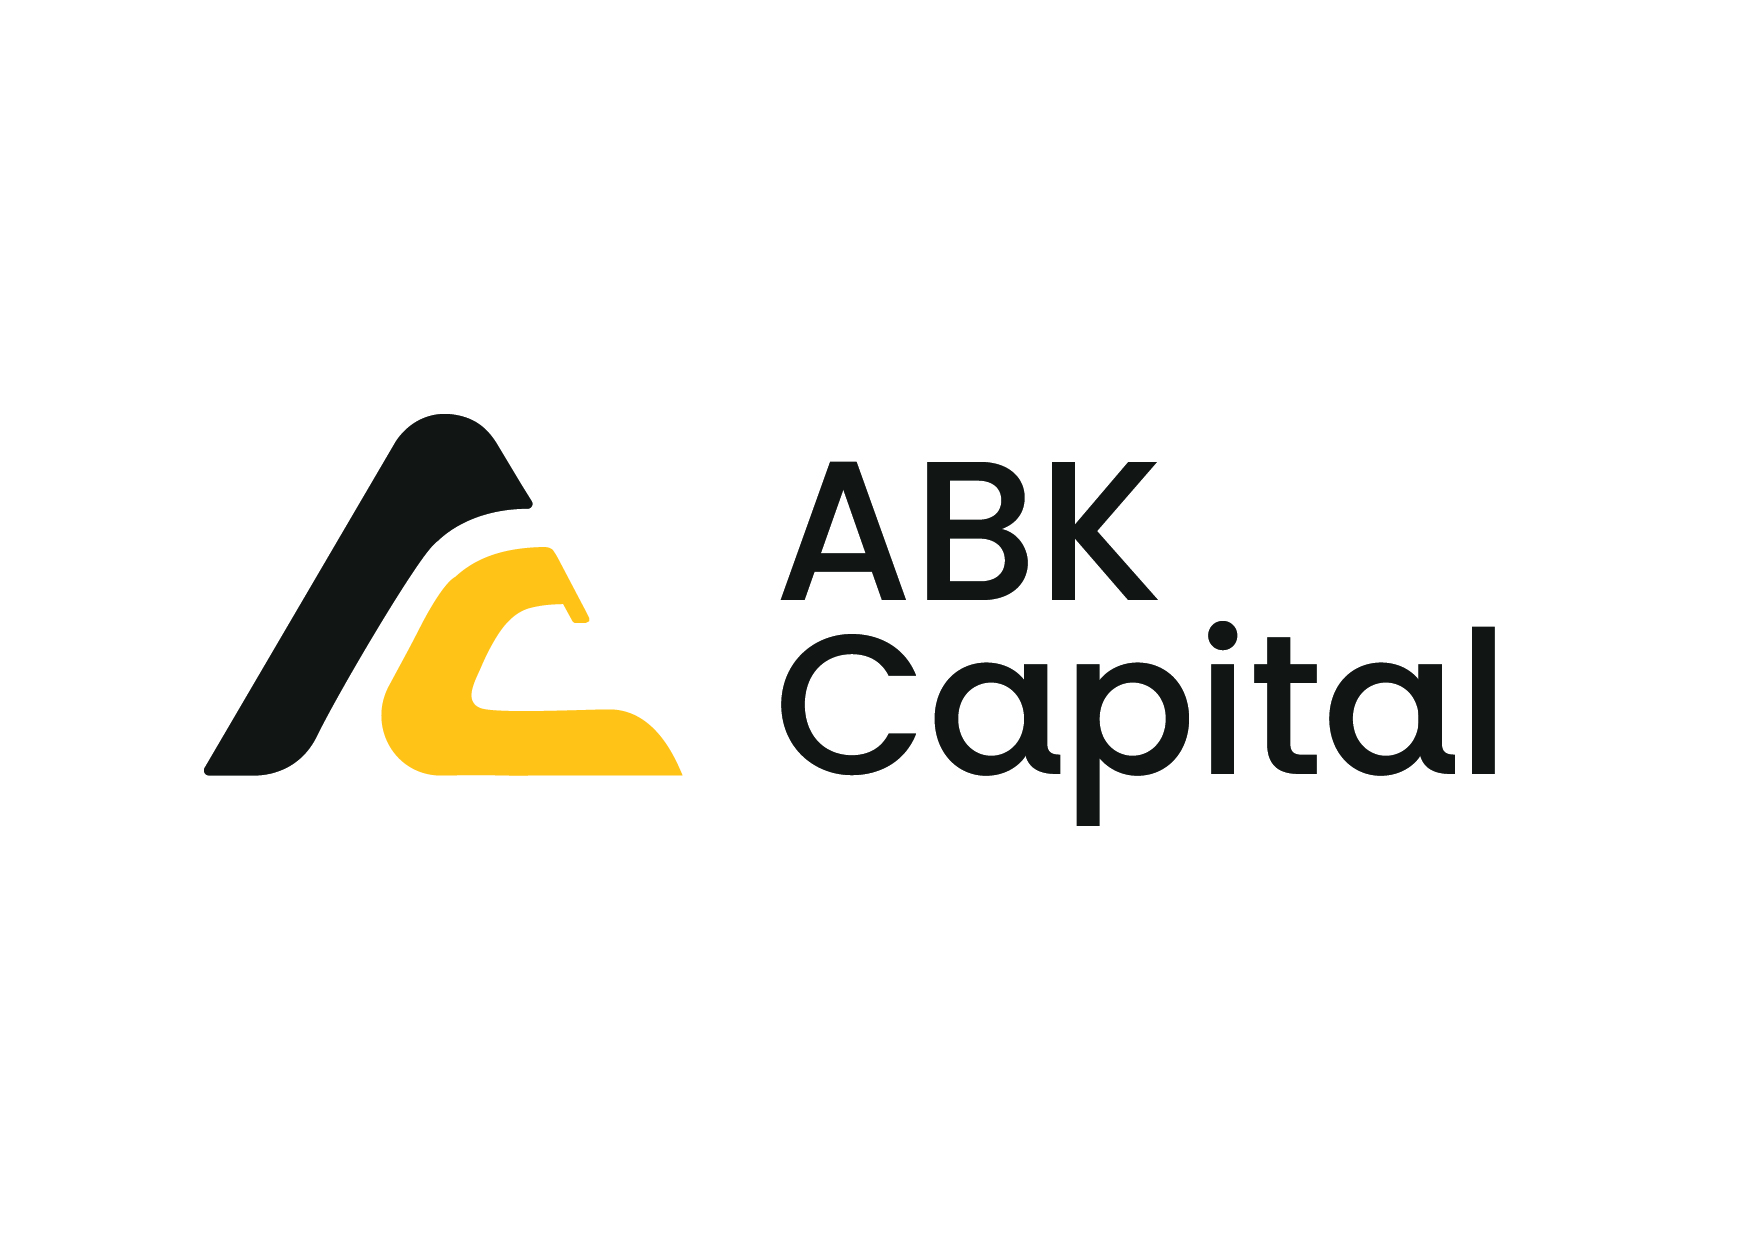 Notification to ABK Capital Customers